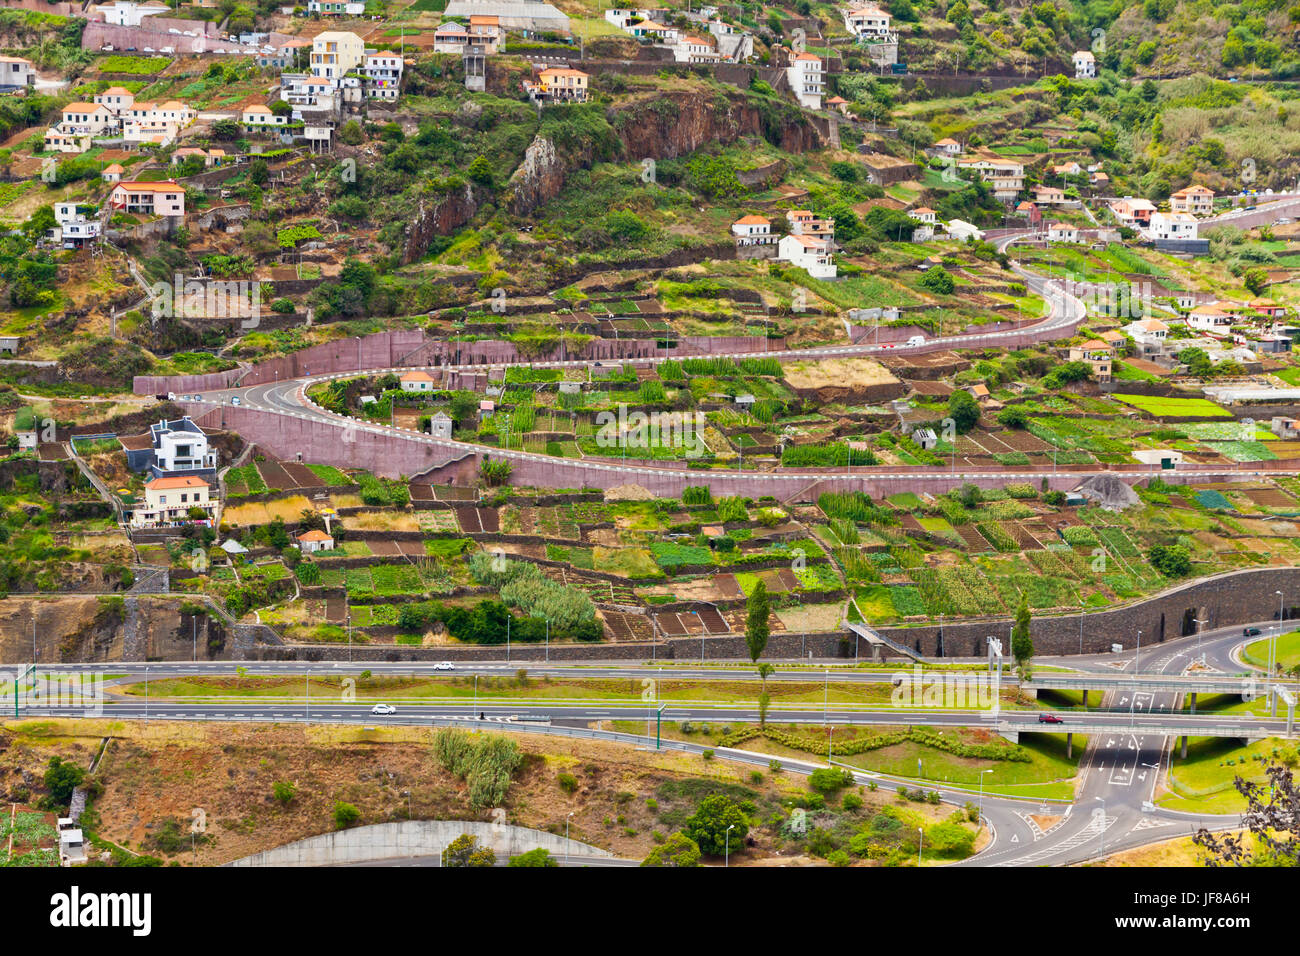 Scenic mountain highway roads on Madeira island, Portugal Stock Photo